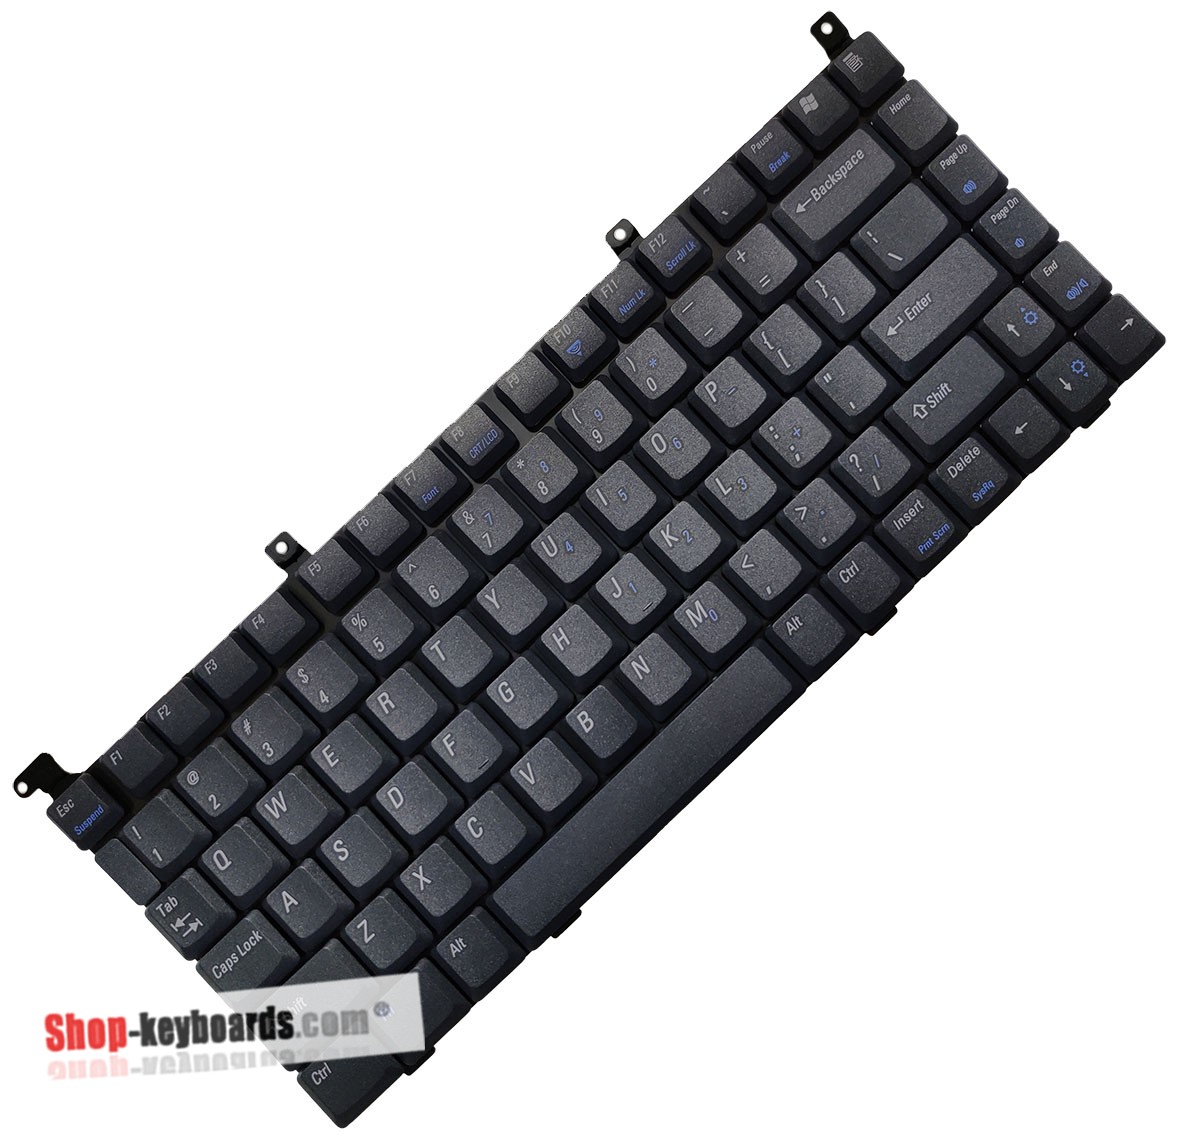 Dell Inspiron 2650 Keyboard replacement